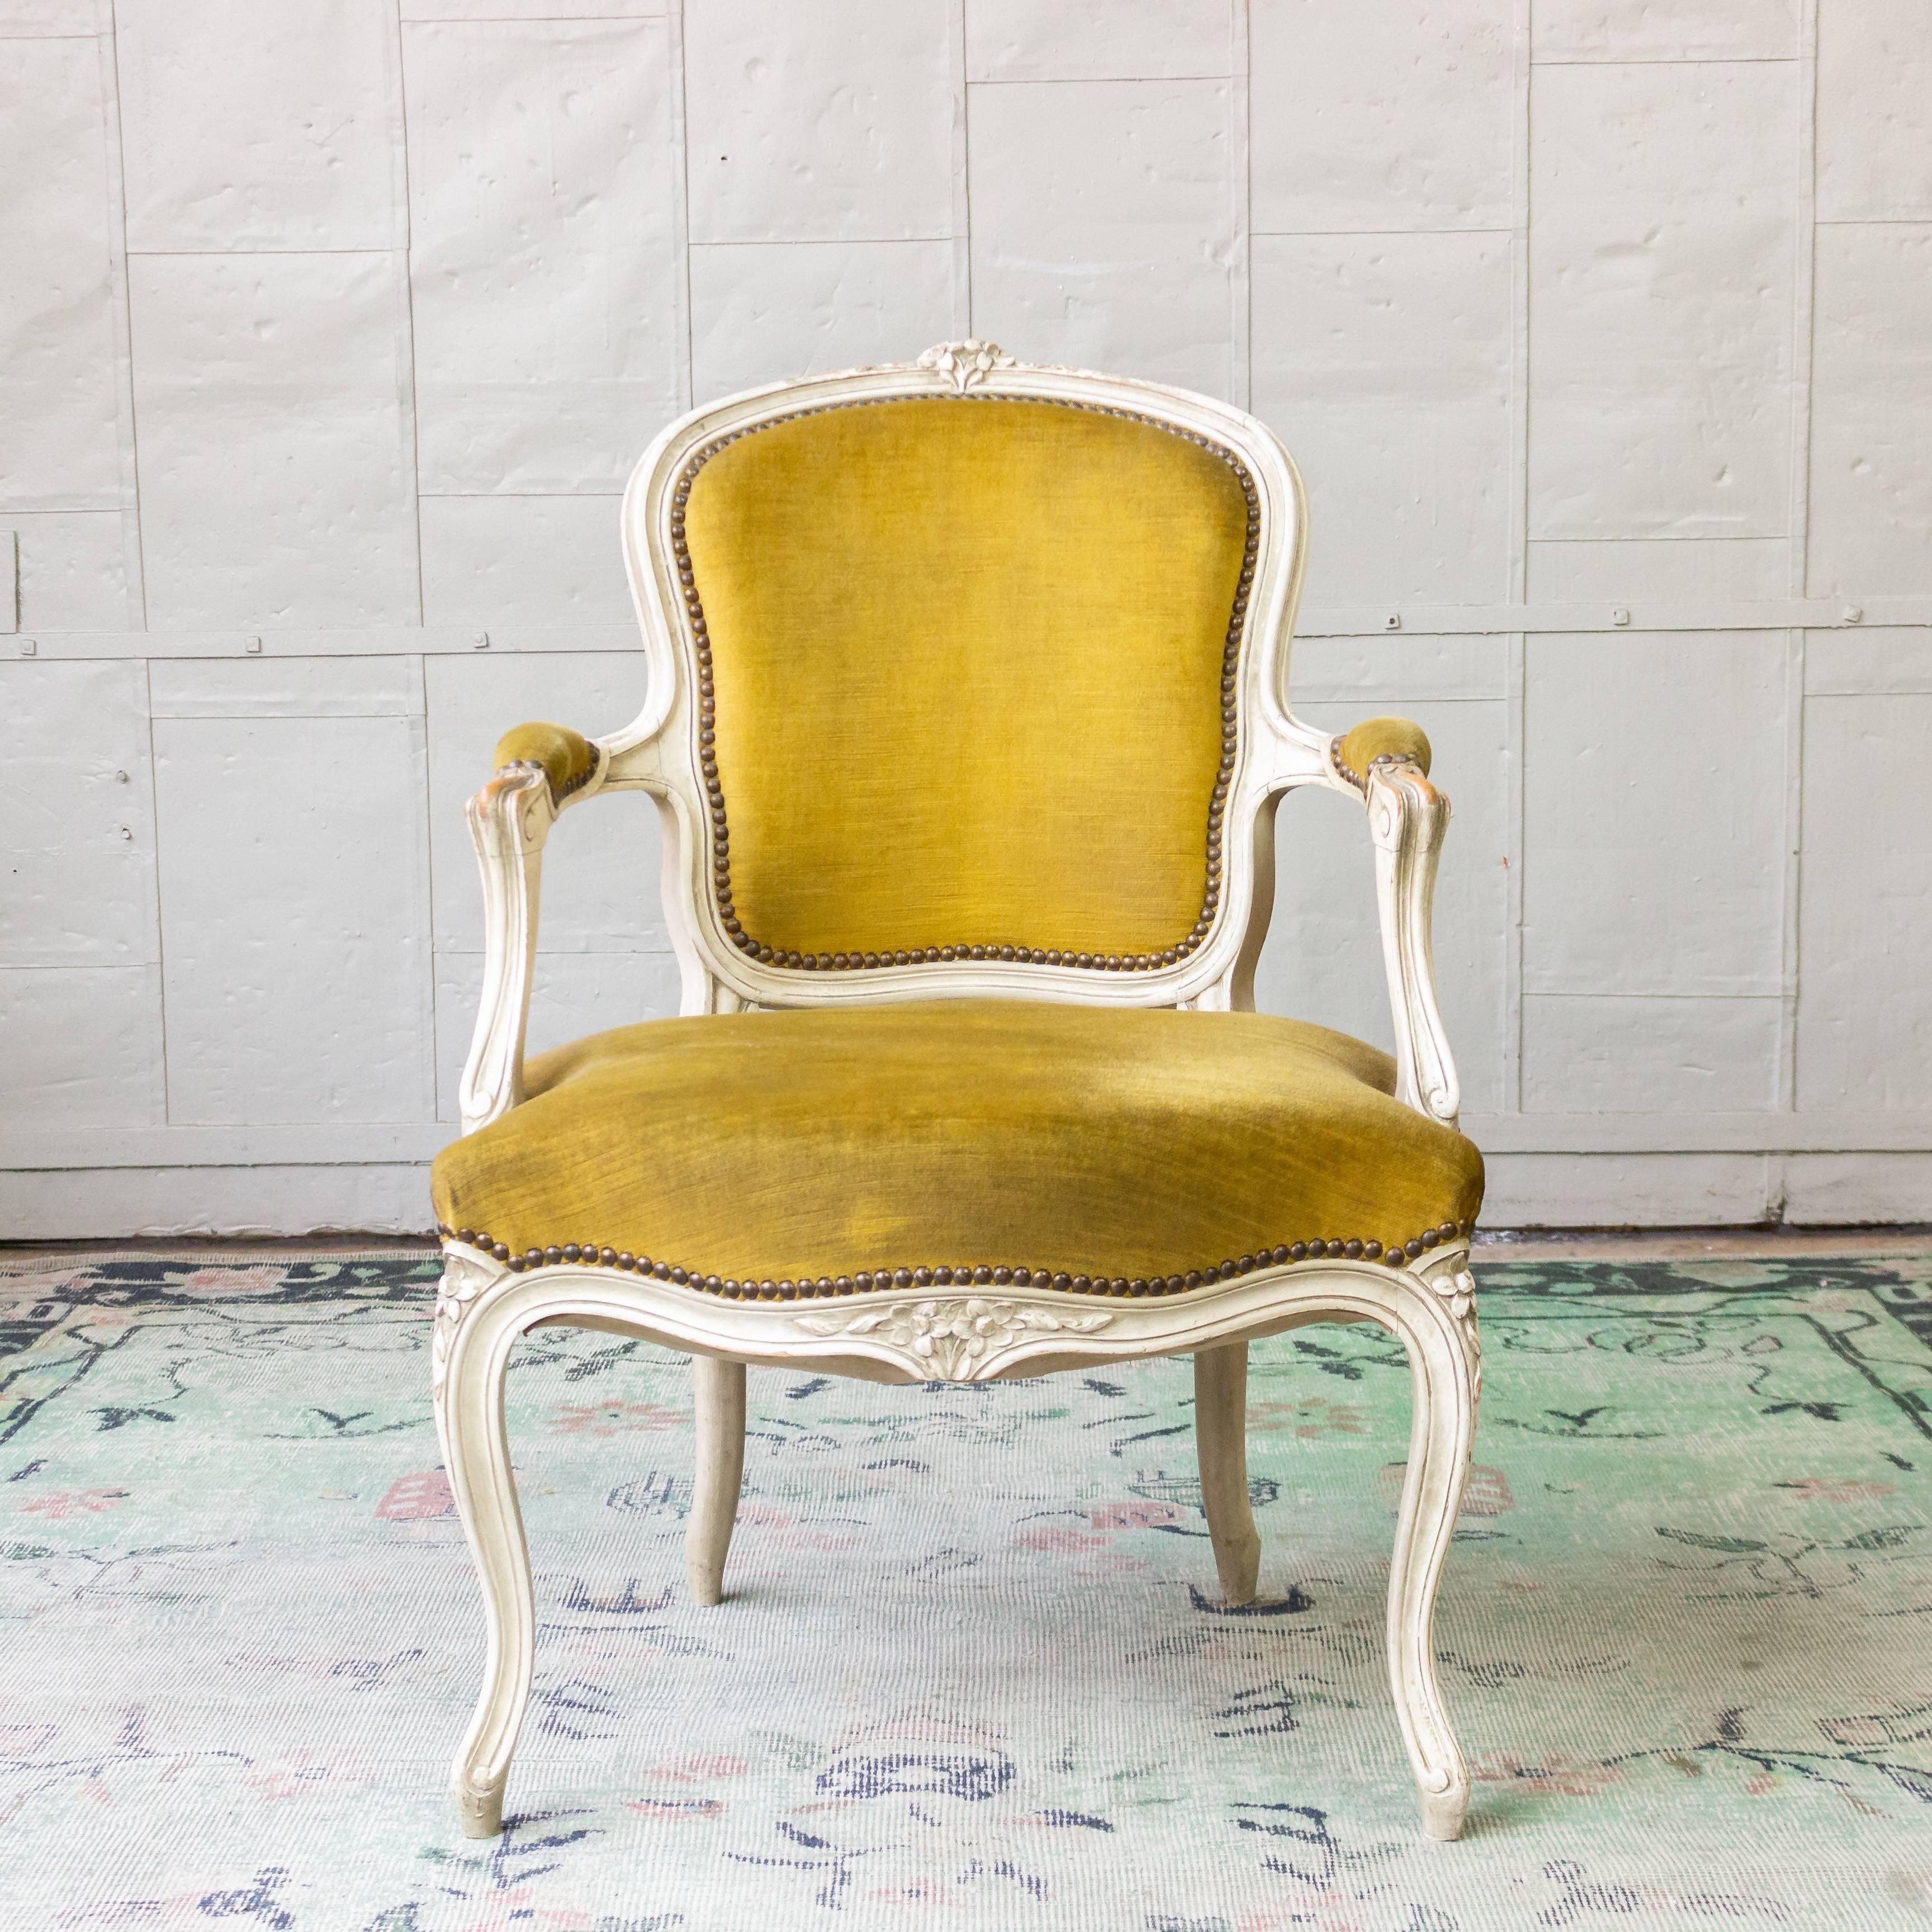 An elegant Louis XV armchair in gold velvet. Experience classic French luxury with this stunning vintage Louis XV armchair. With its white patinated finish, ornately carved wooden frame, padded arms, and decorative nailheads, this strong statement